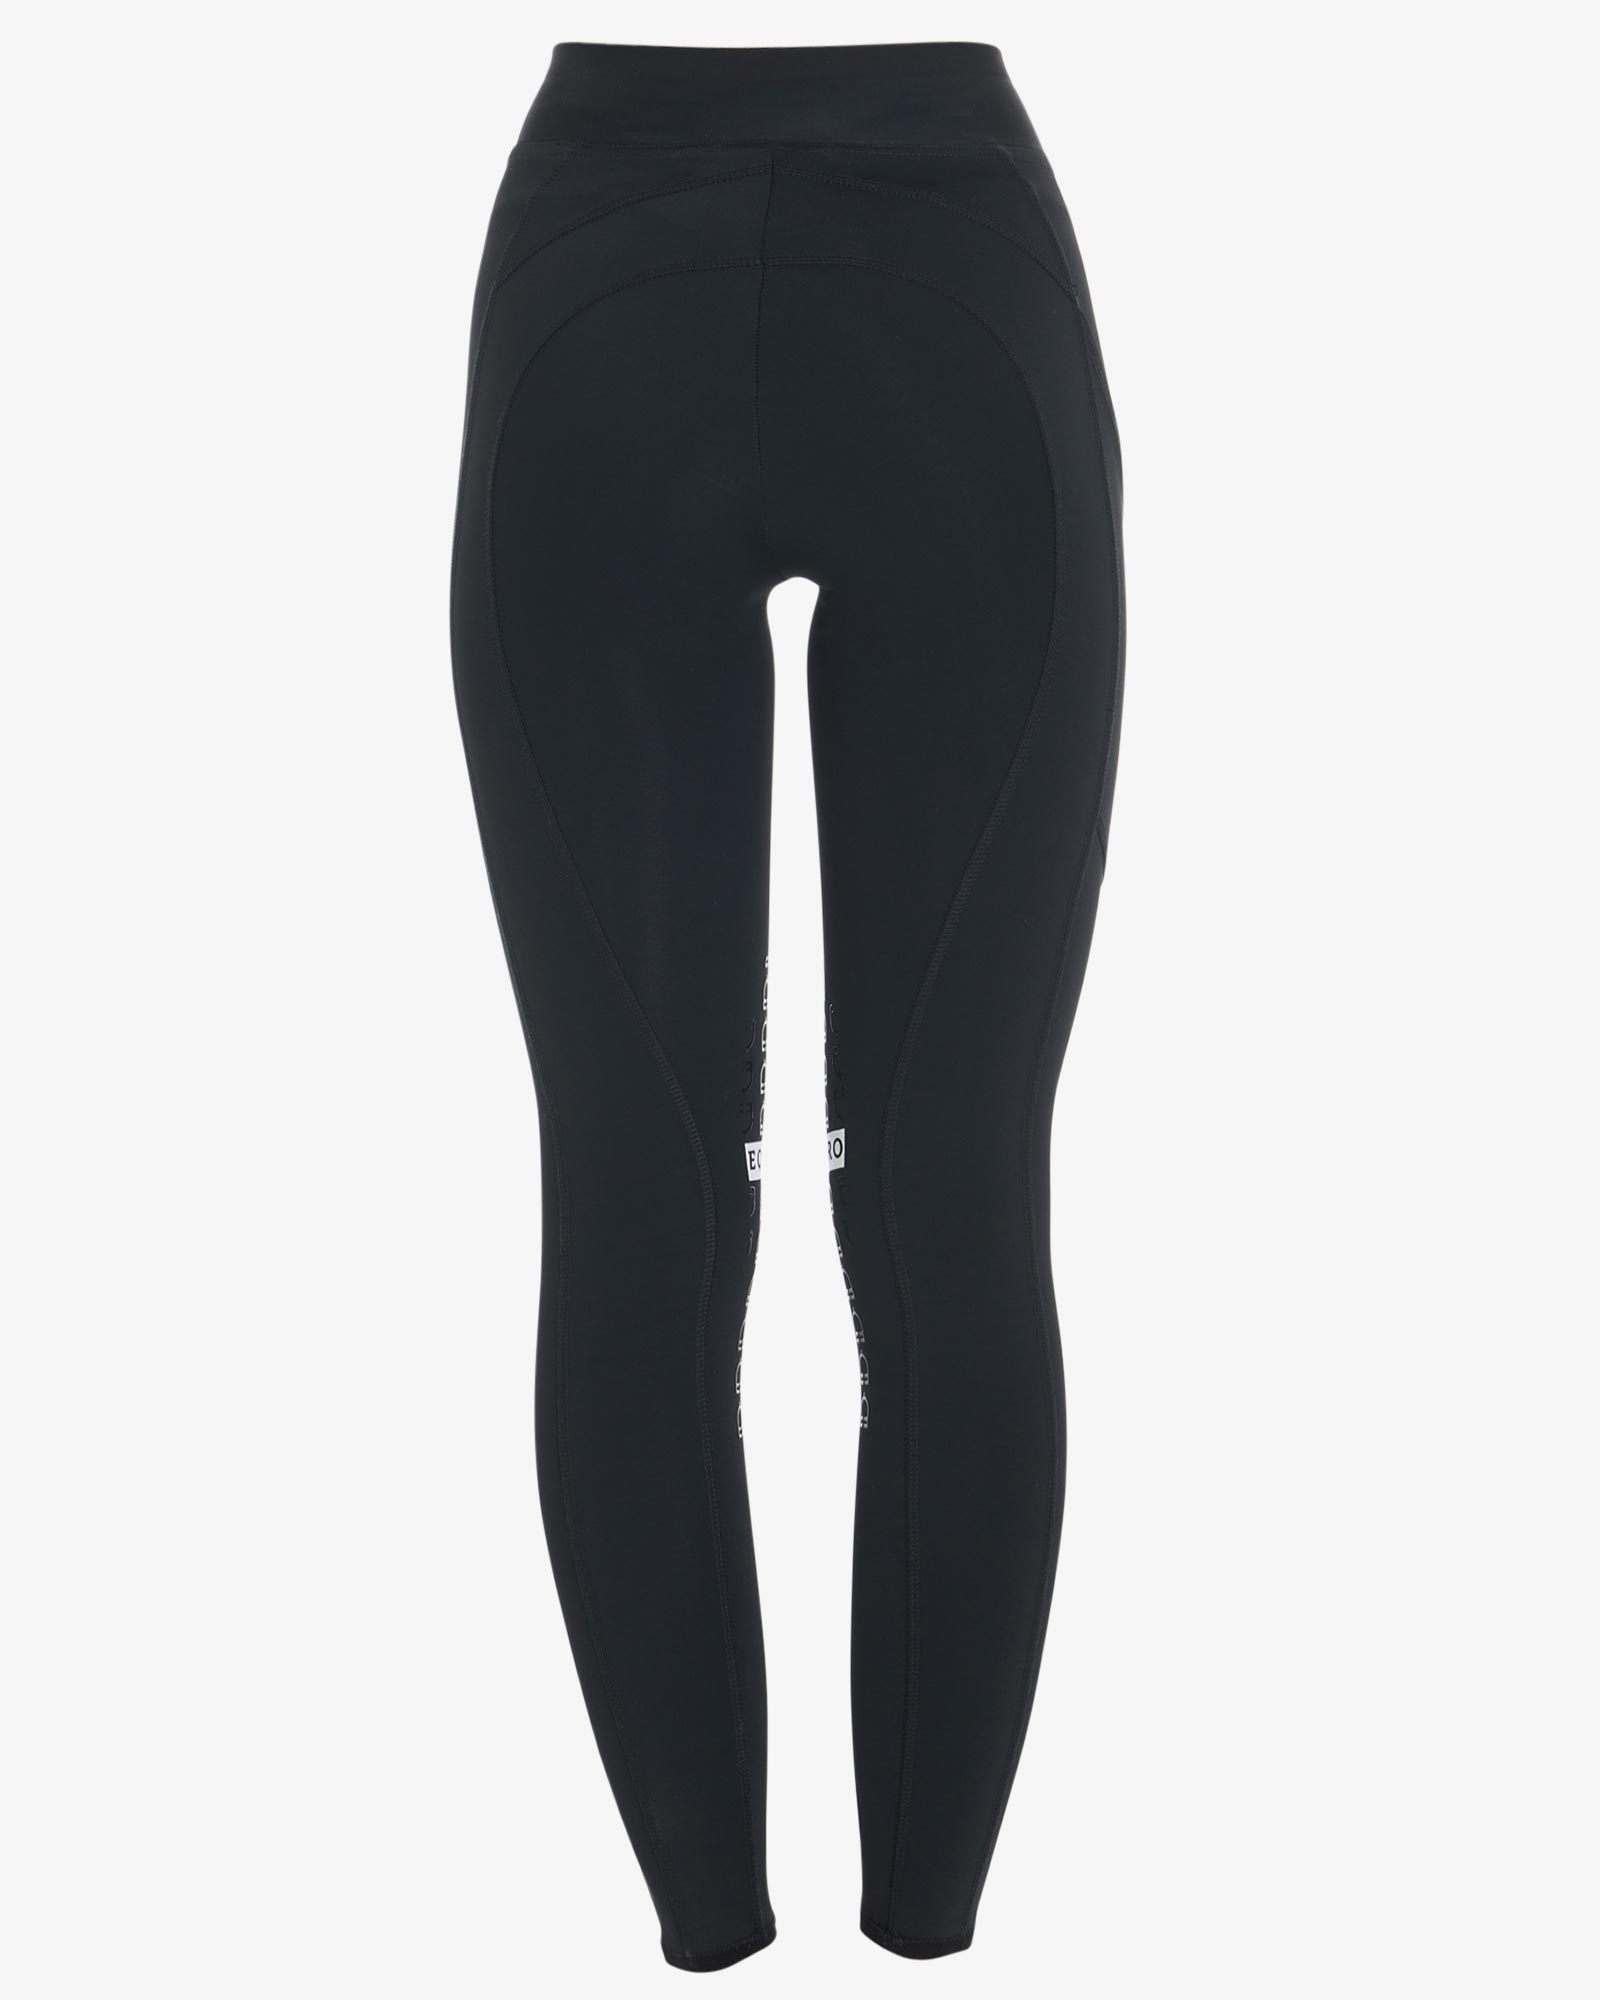 Adidas STELLA MCCARTNEY Stretch Fabric Leggings with Visible Stitching and  Heel Cut-out Detail women - Glamood Outlet